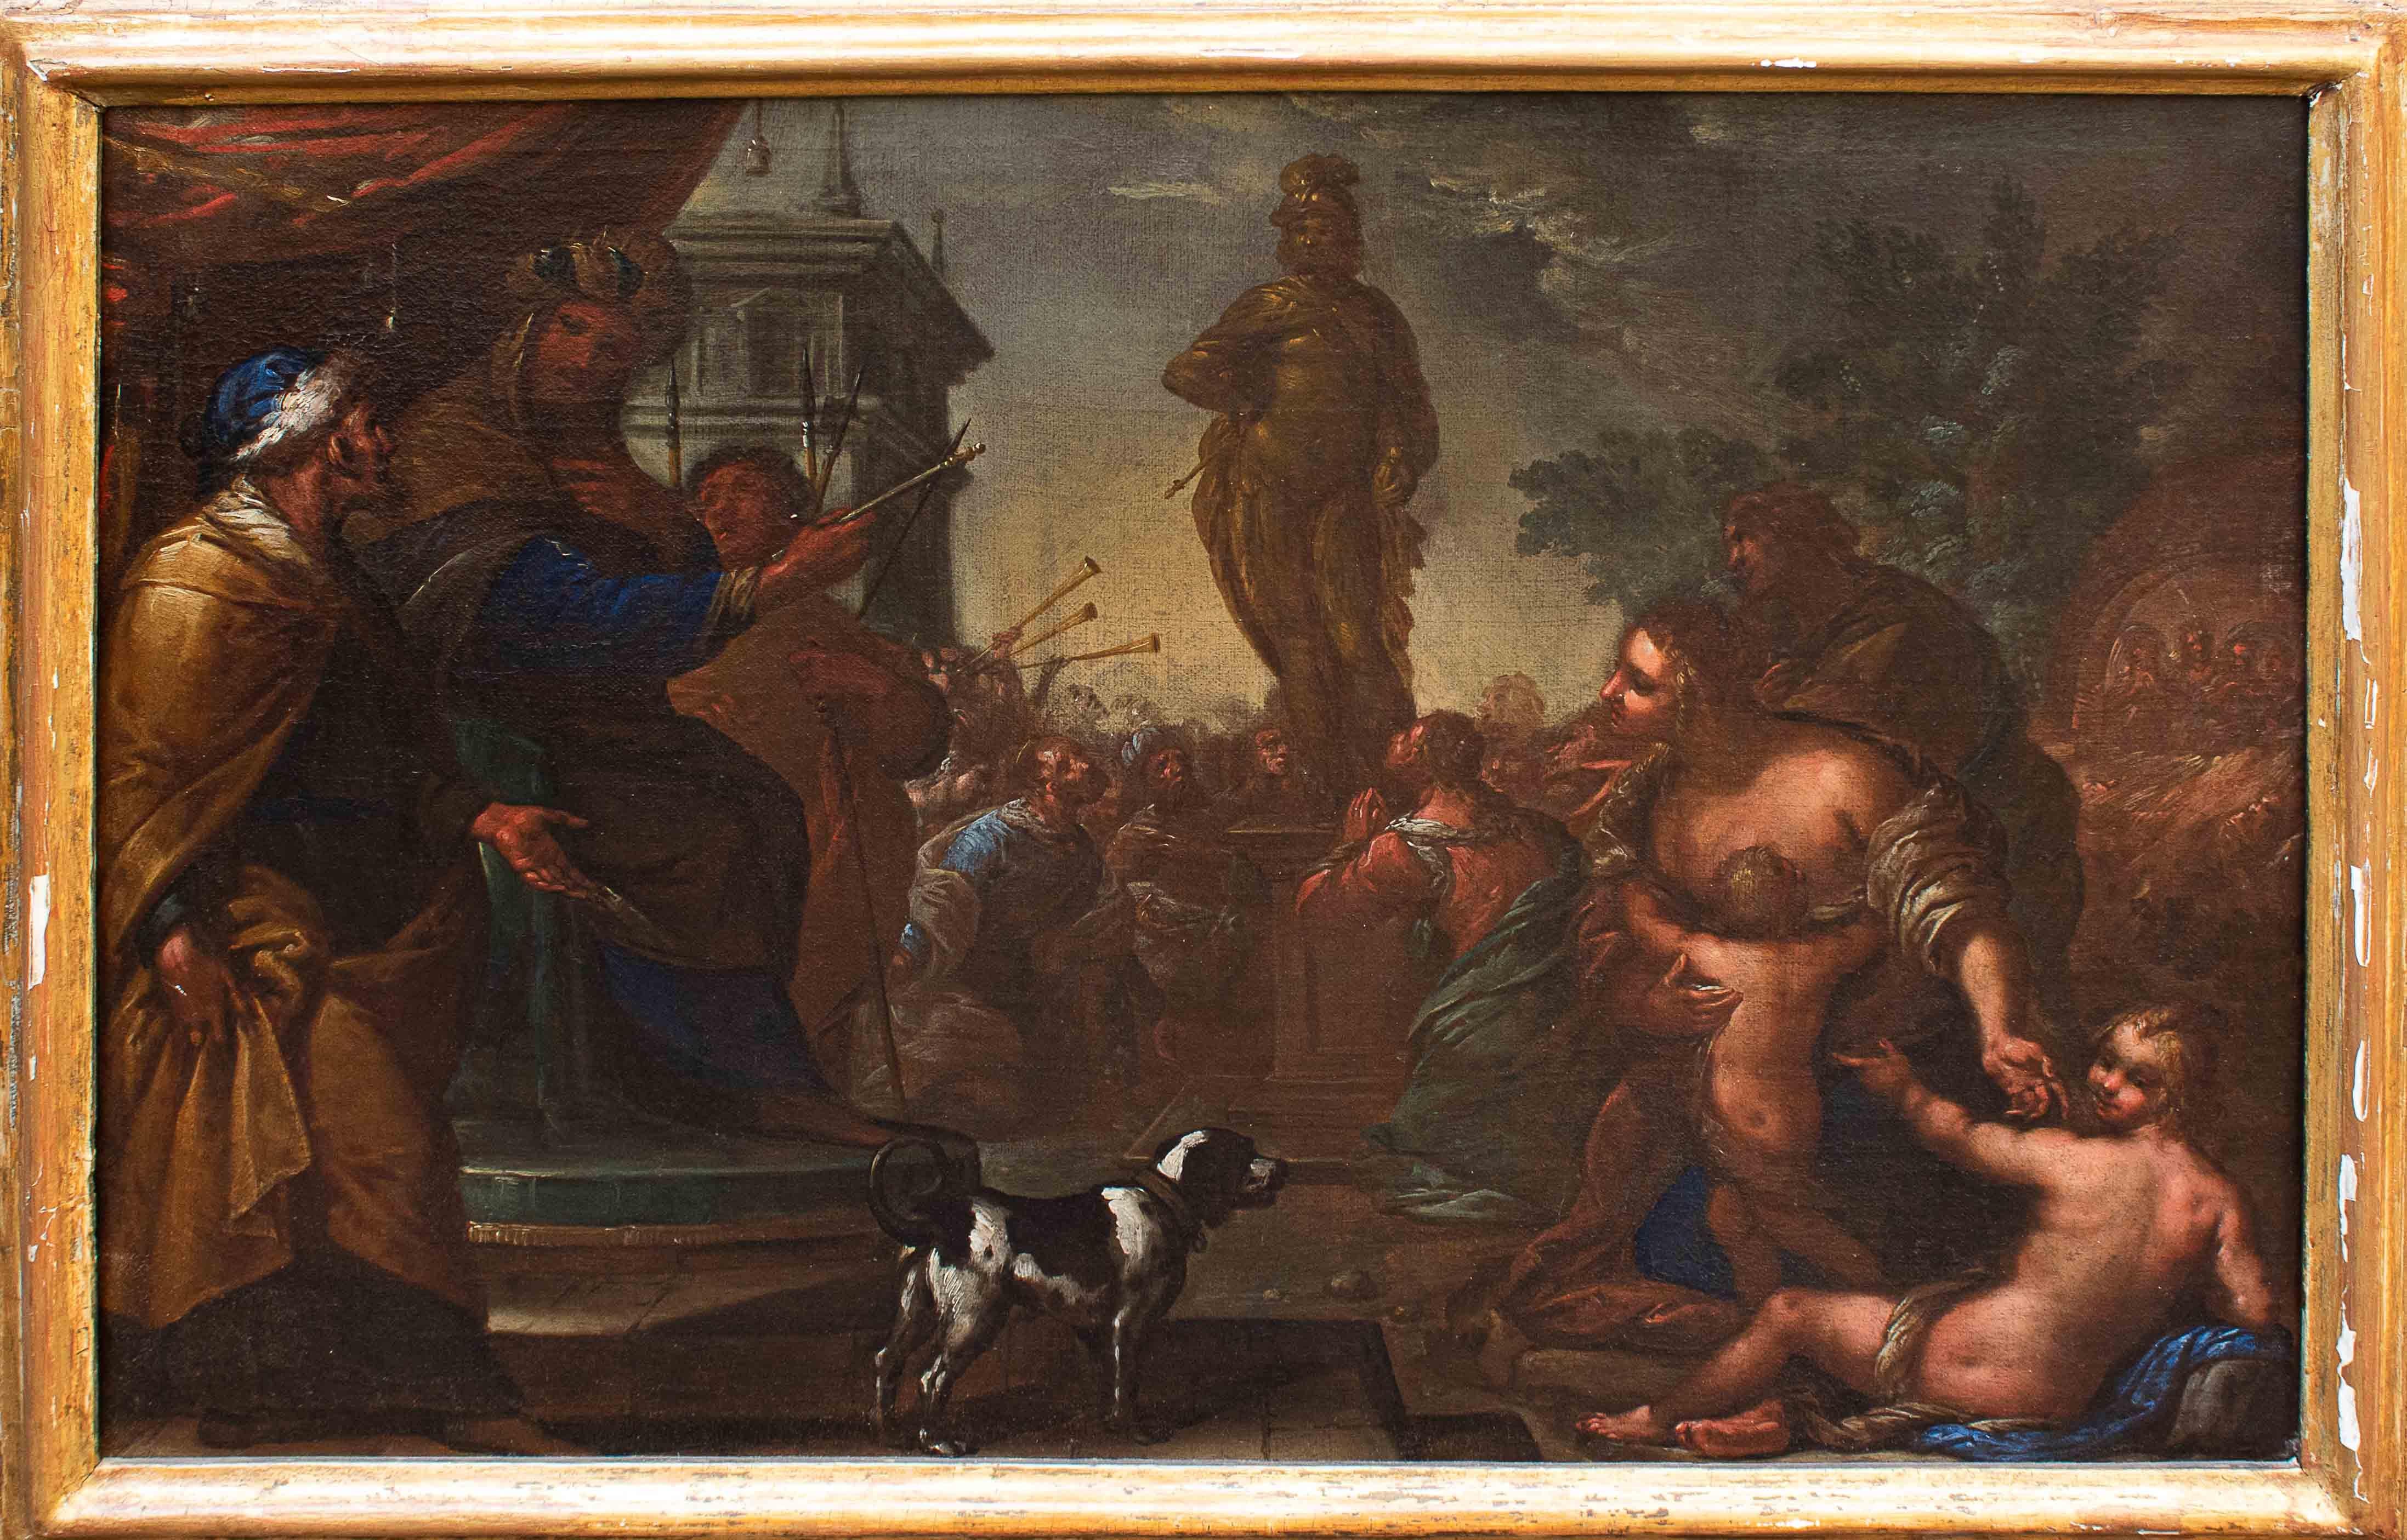 Italian 17th Century Two Biblical Episodes Paintings by Procaccini the Younger